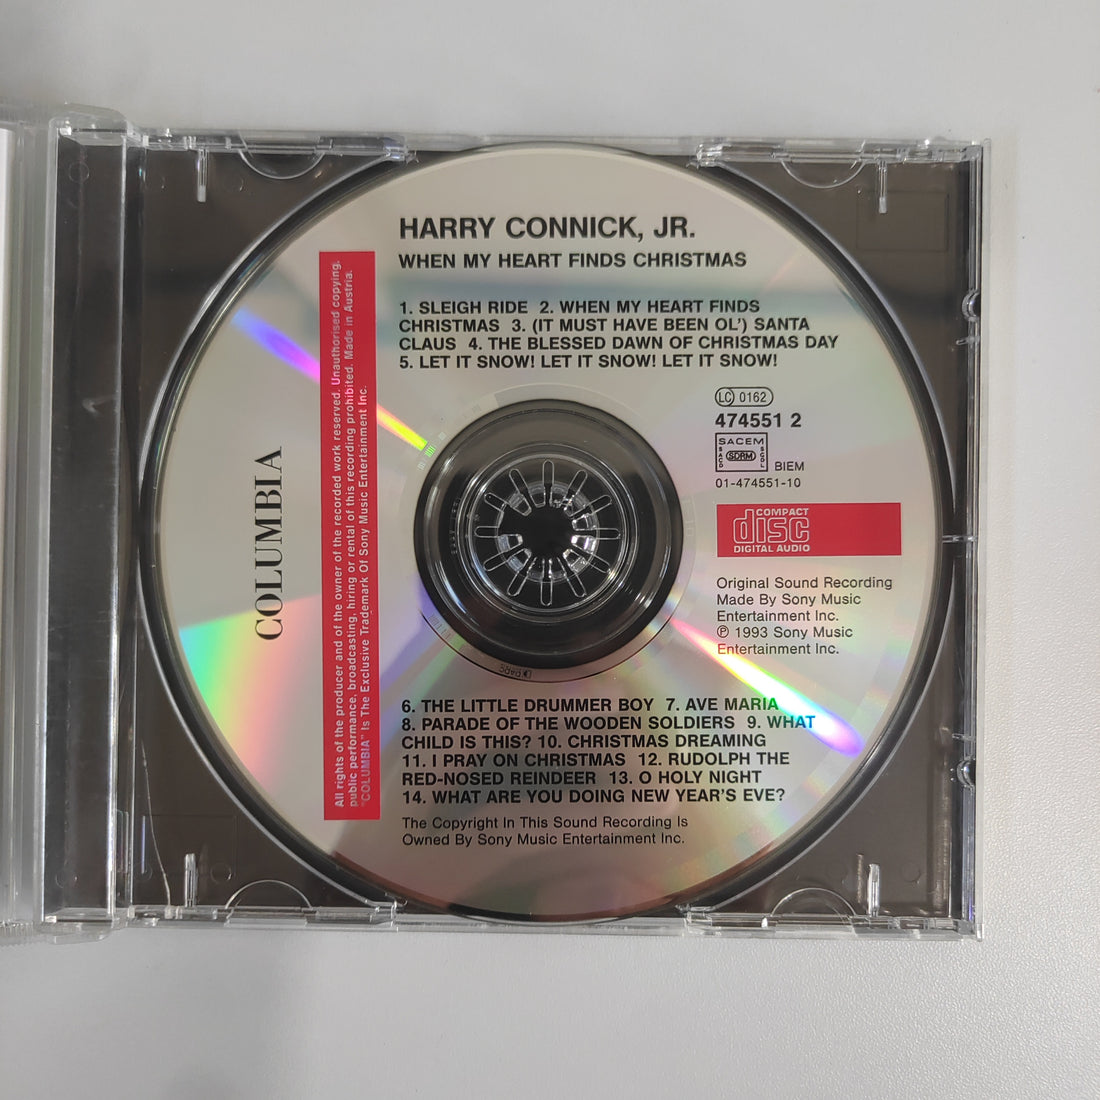 Harry Connick, Jr. - When My Heart Finds Christmas (CD) (VG+)